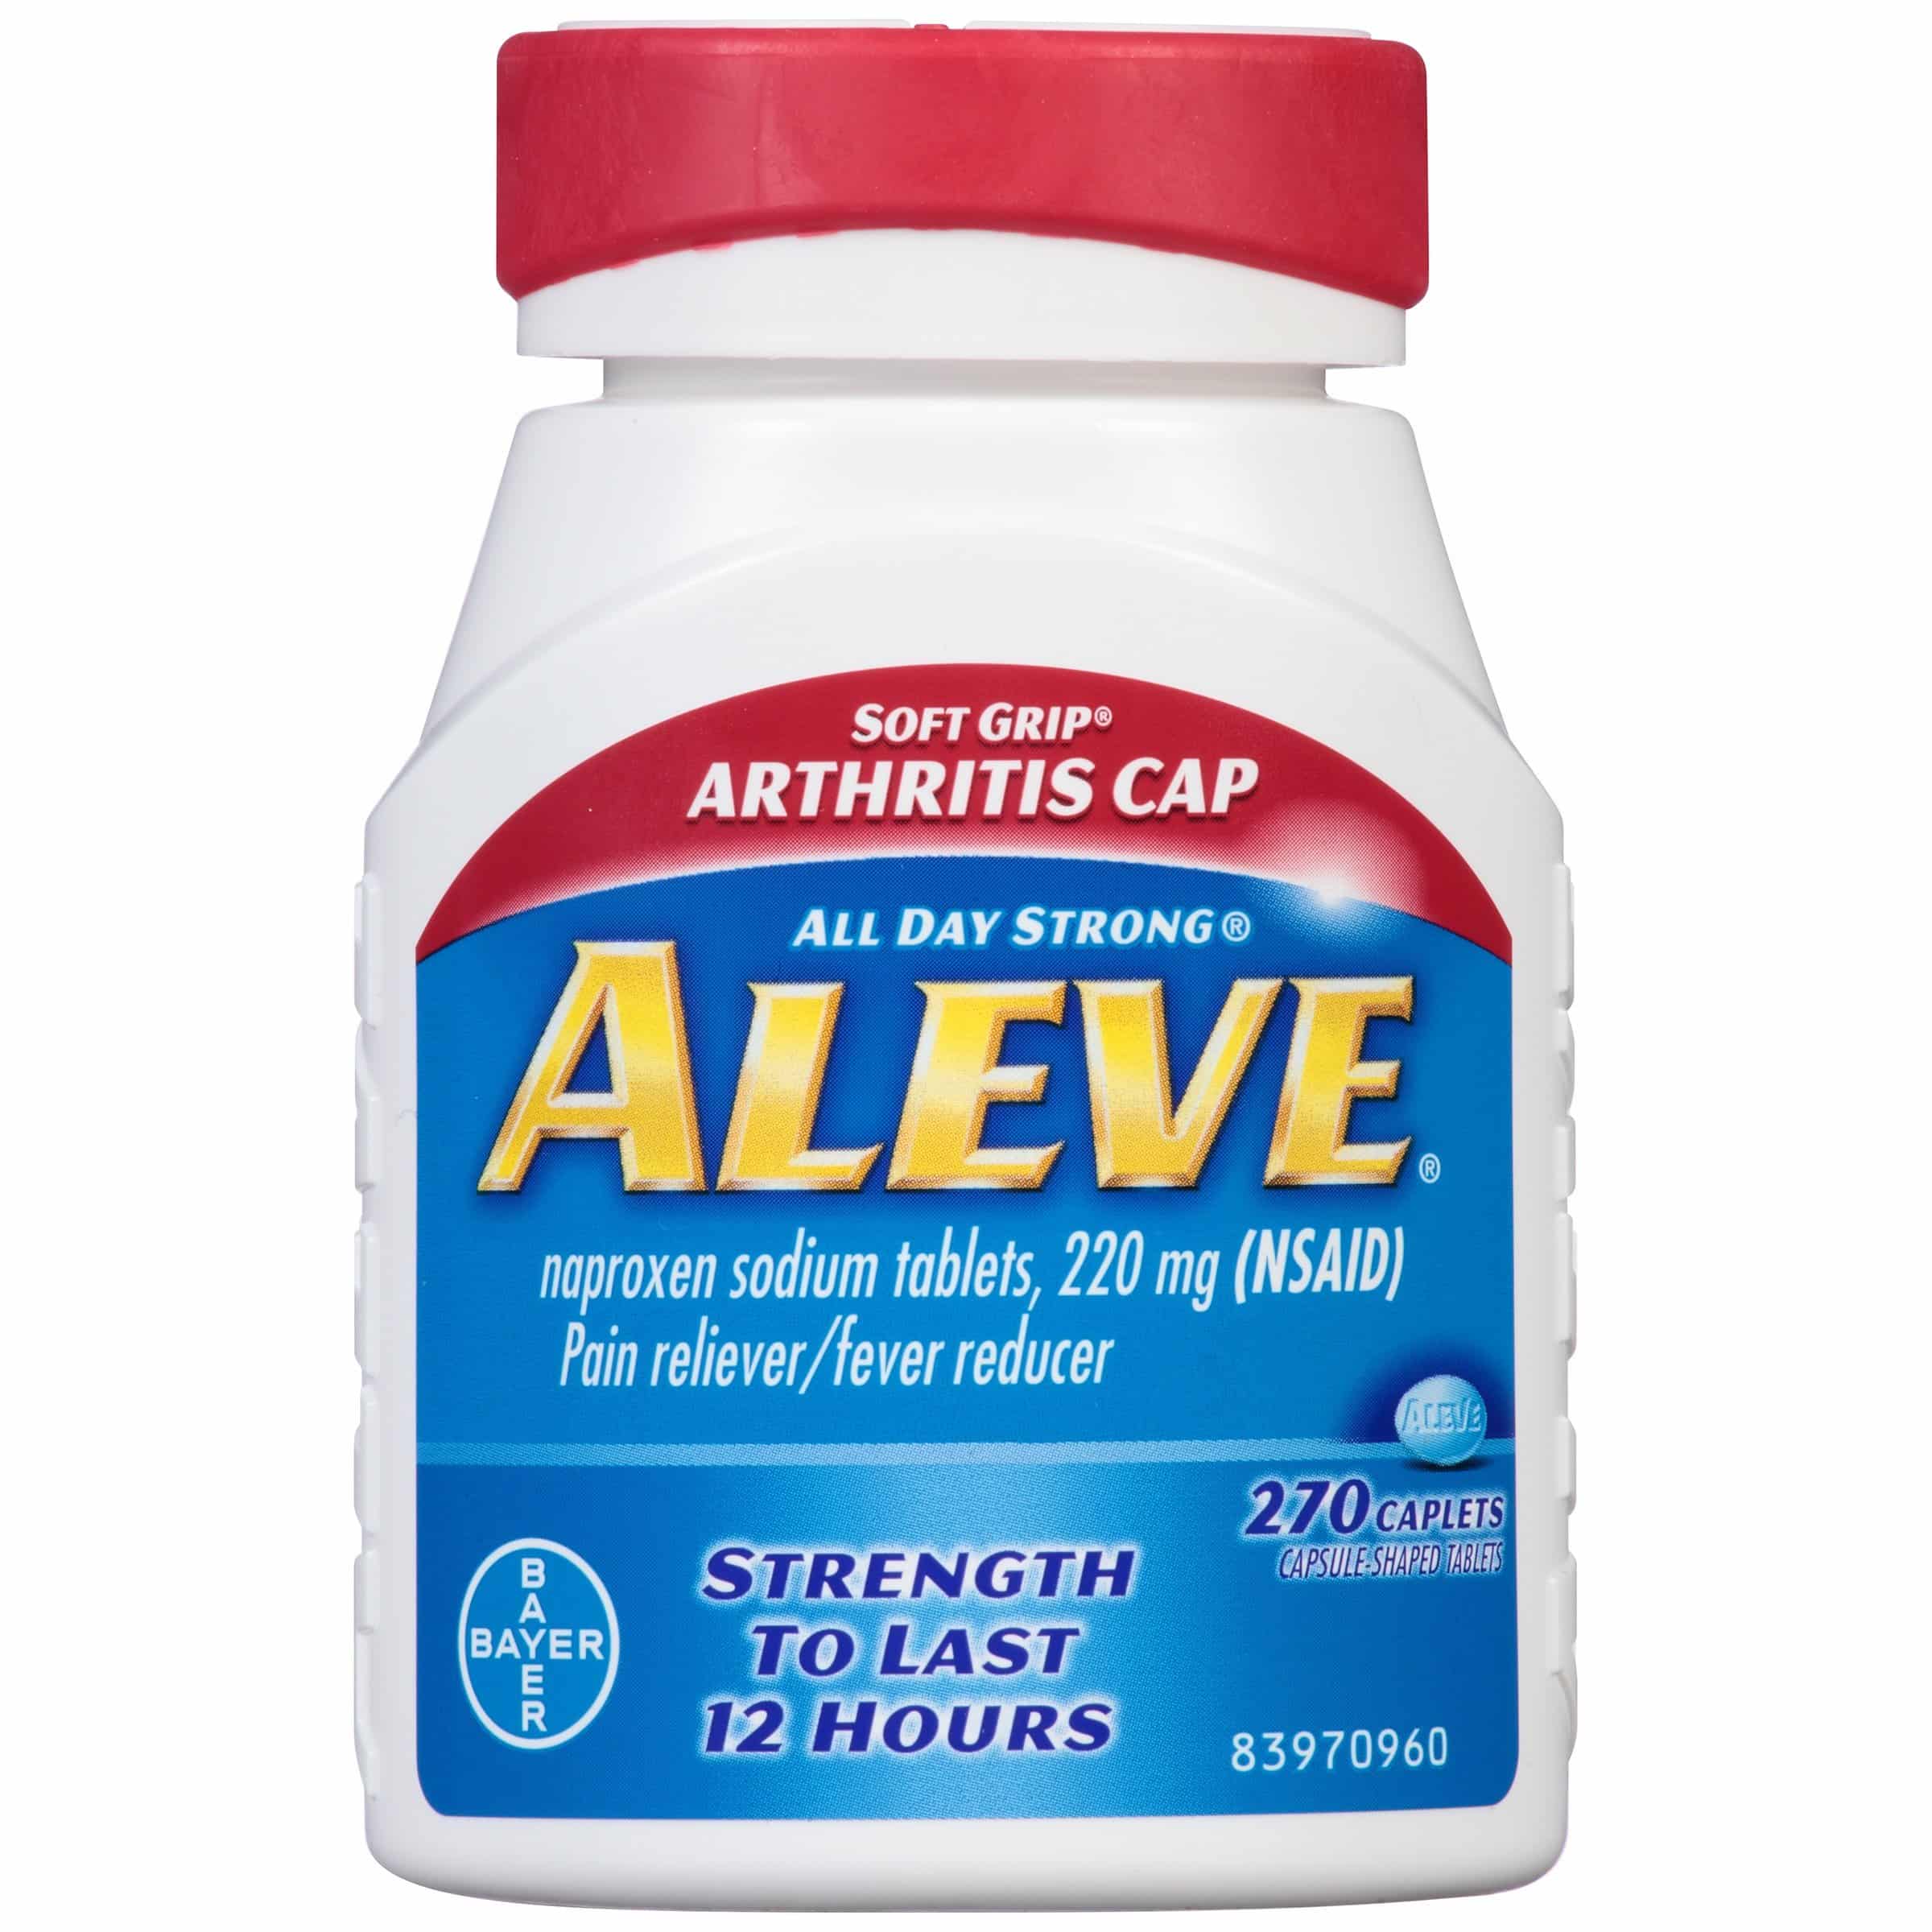 Which Is Better For Arthritis Tylenol Or Aleve